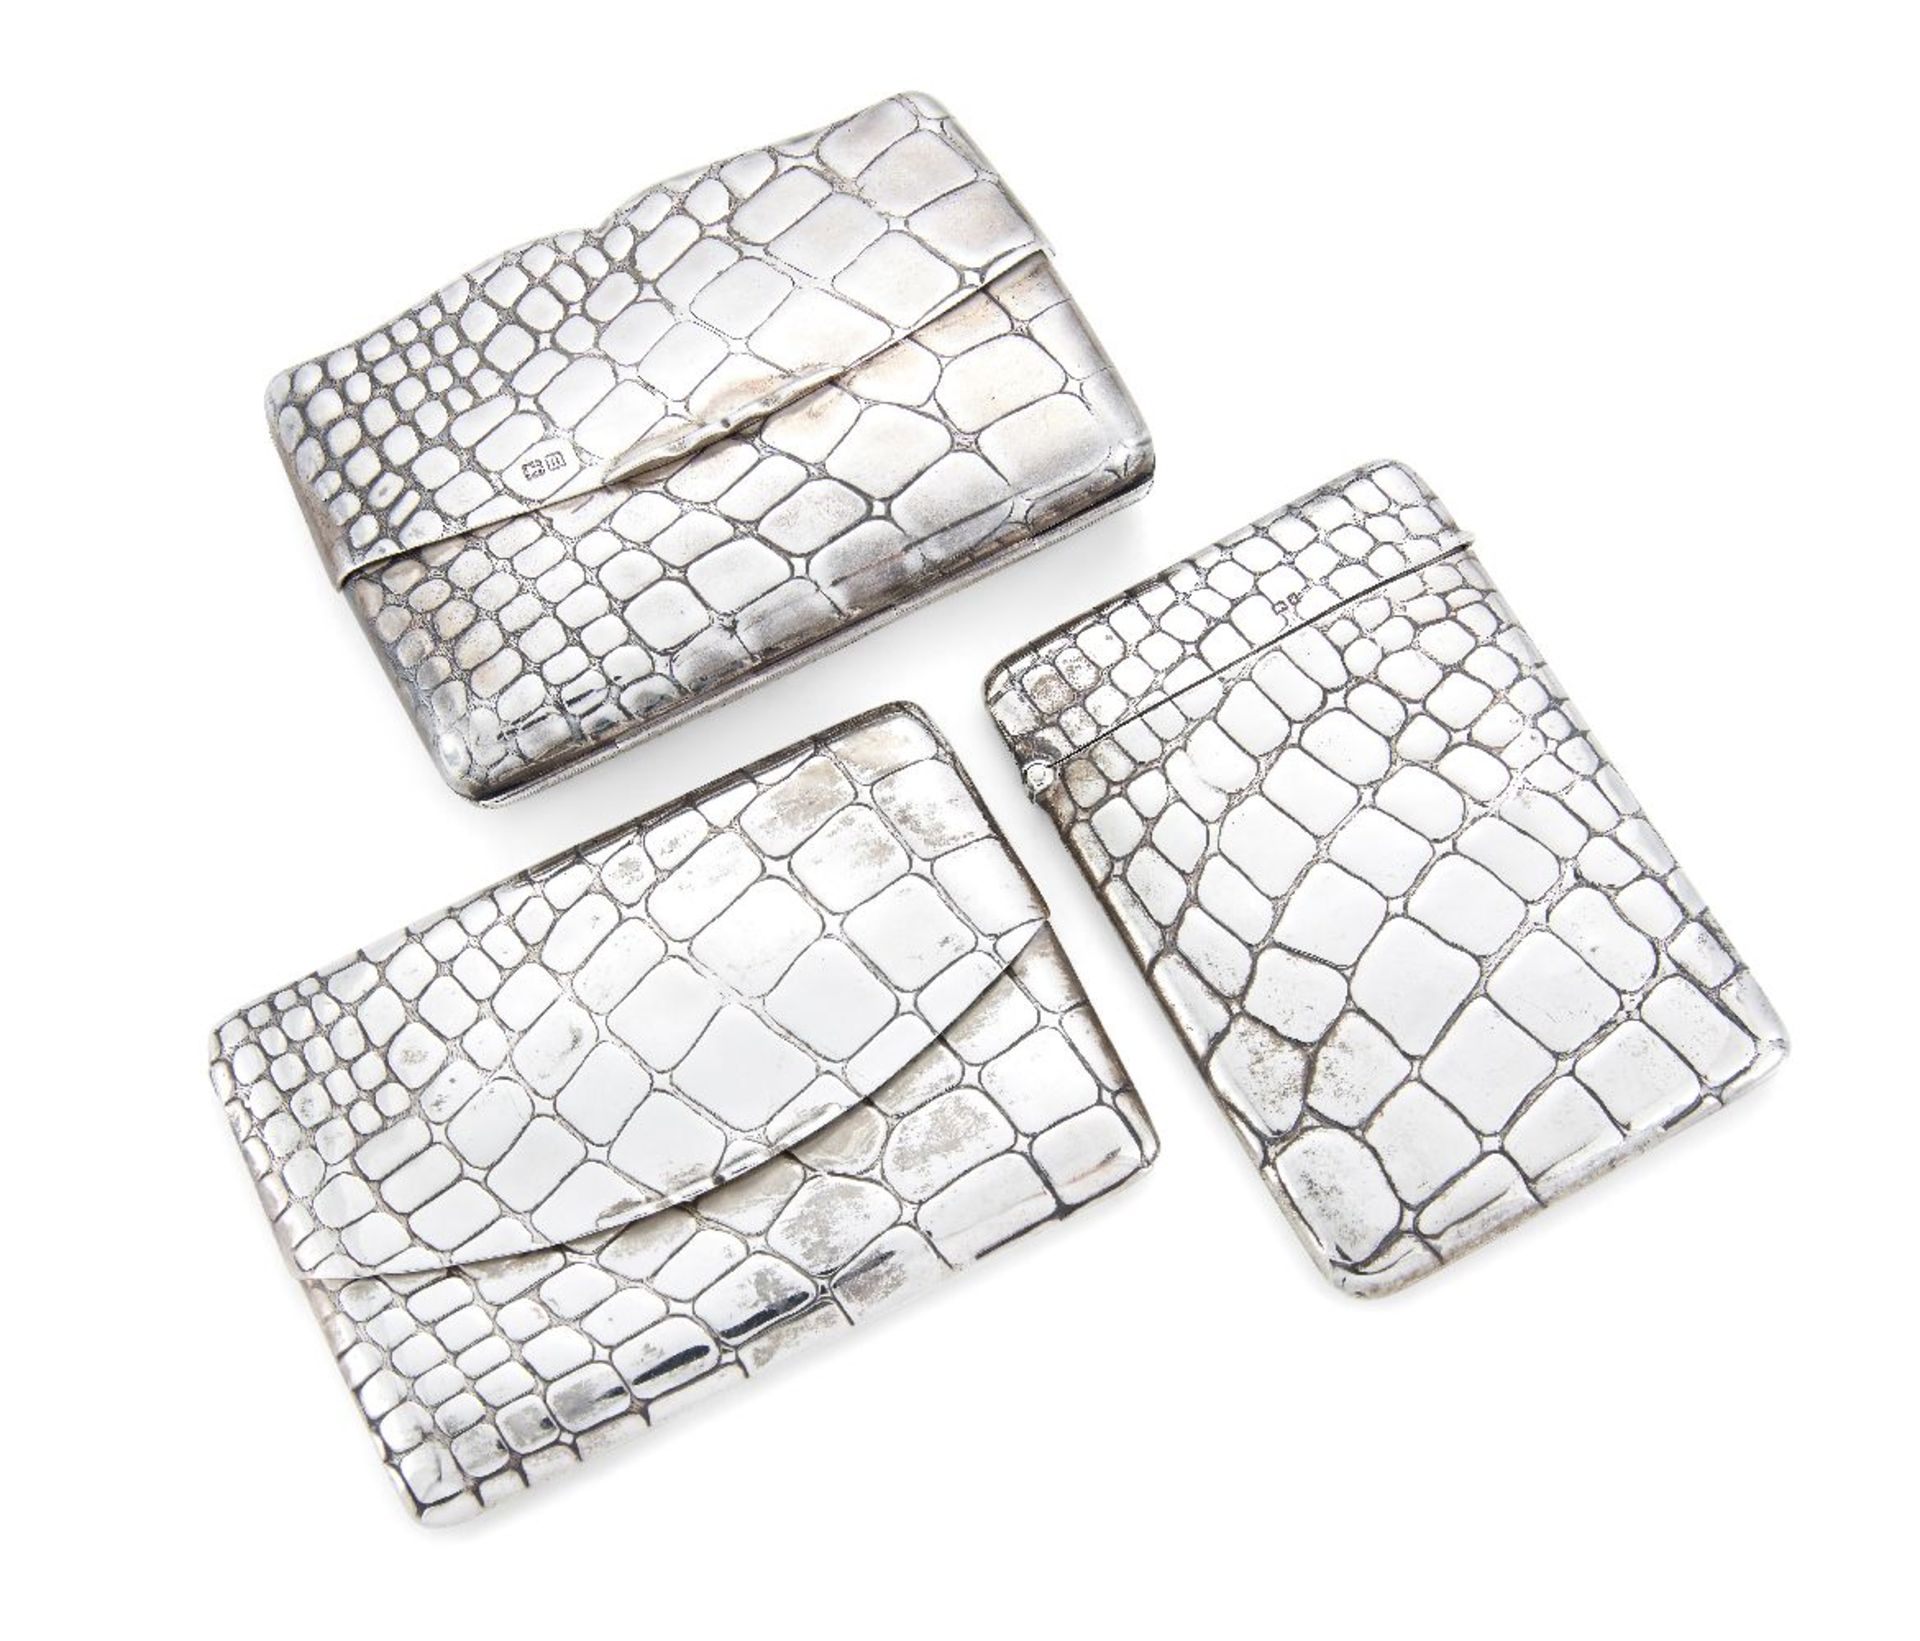 An Edwardian silver purse by Sampson Mordan, London, c.1907, the textured silver designed to